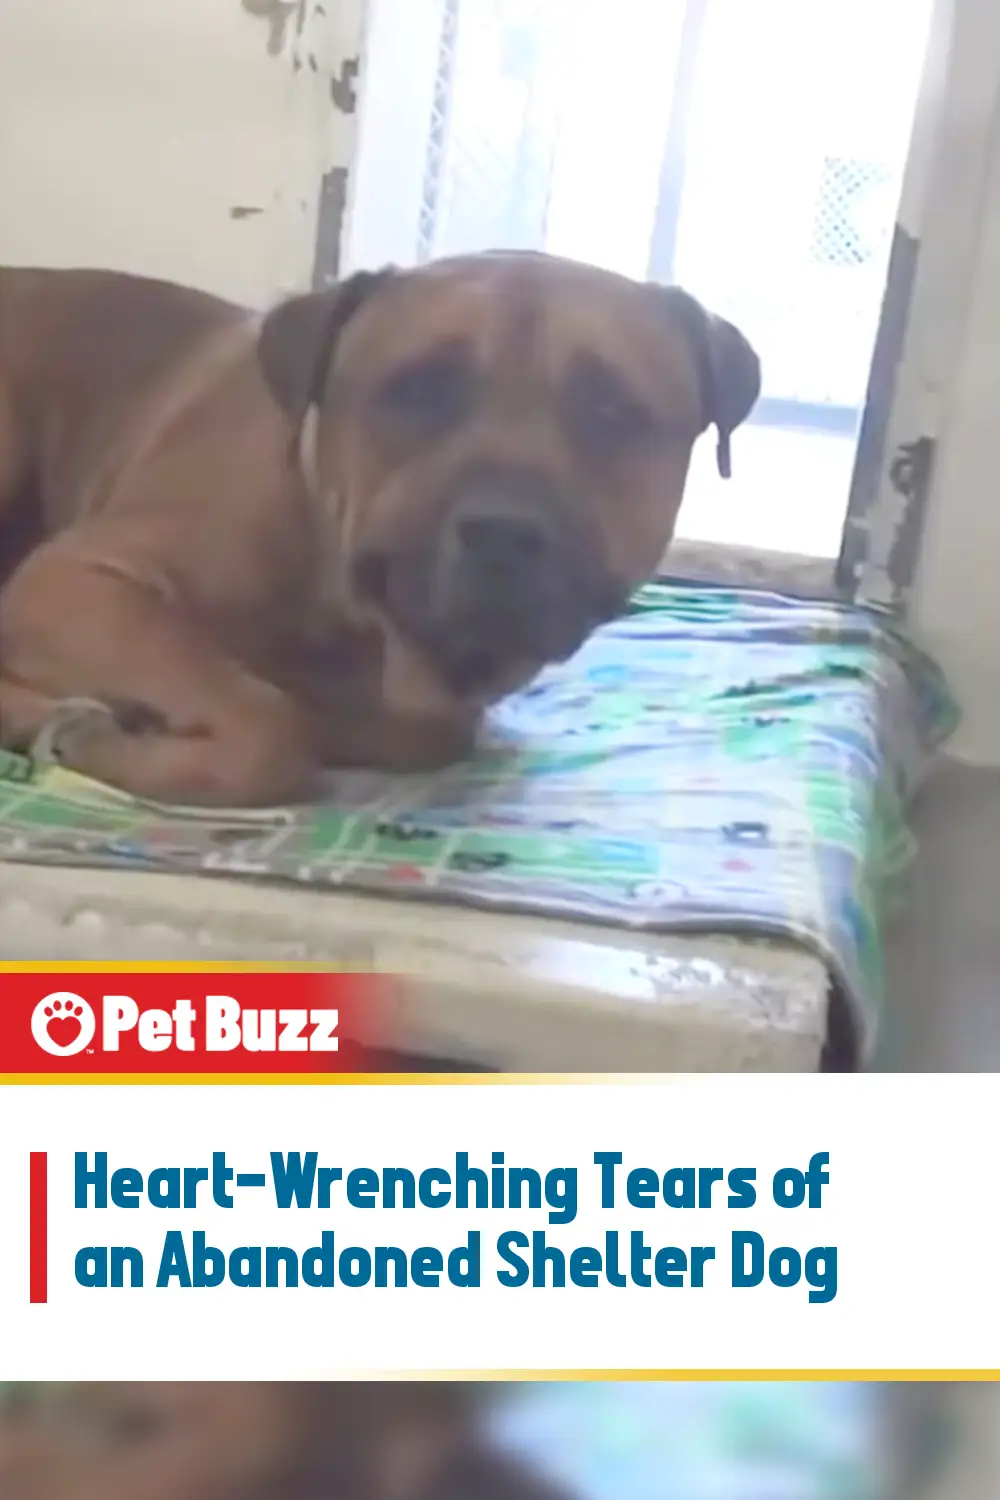 Heart-Wrenching Tears of an Abandoned Shelter Dog